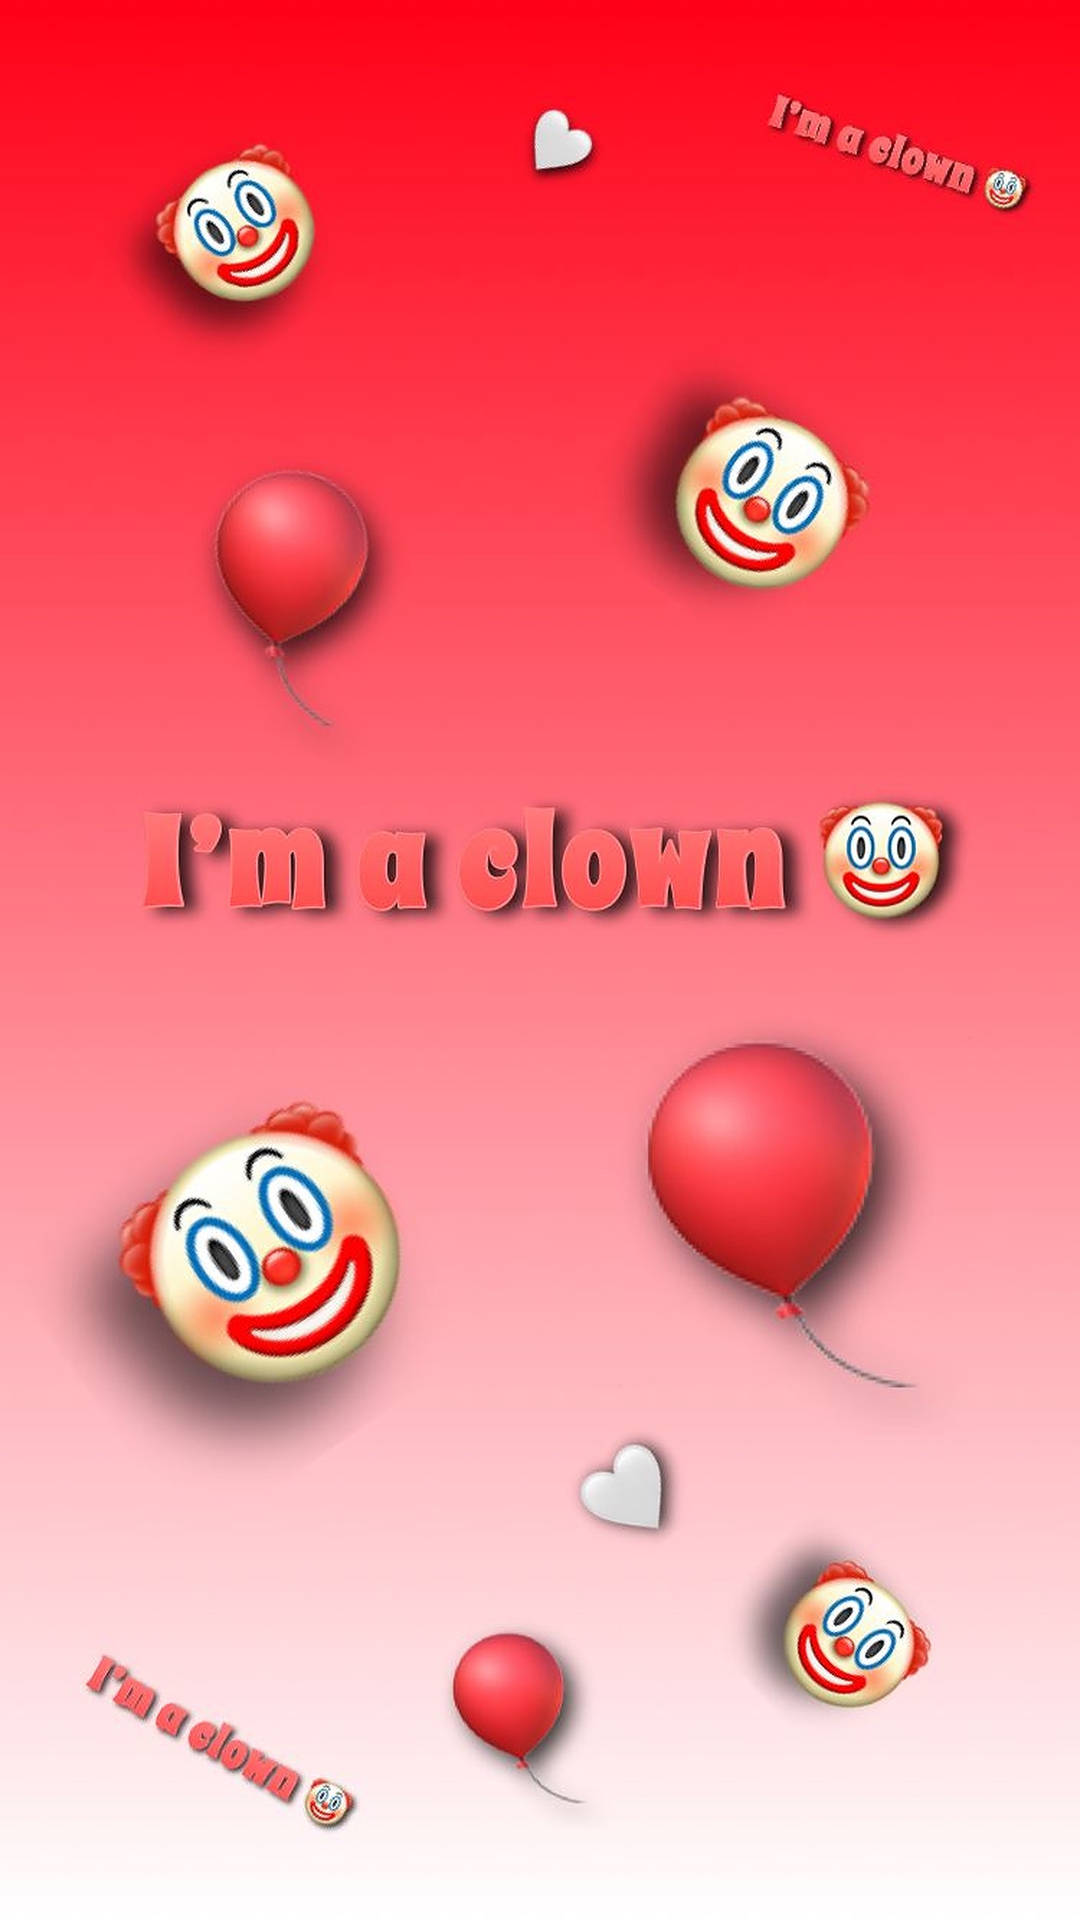 Colorful Expressions of a Clown Wallpaper